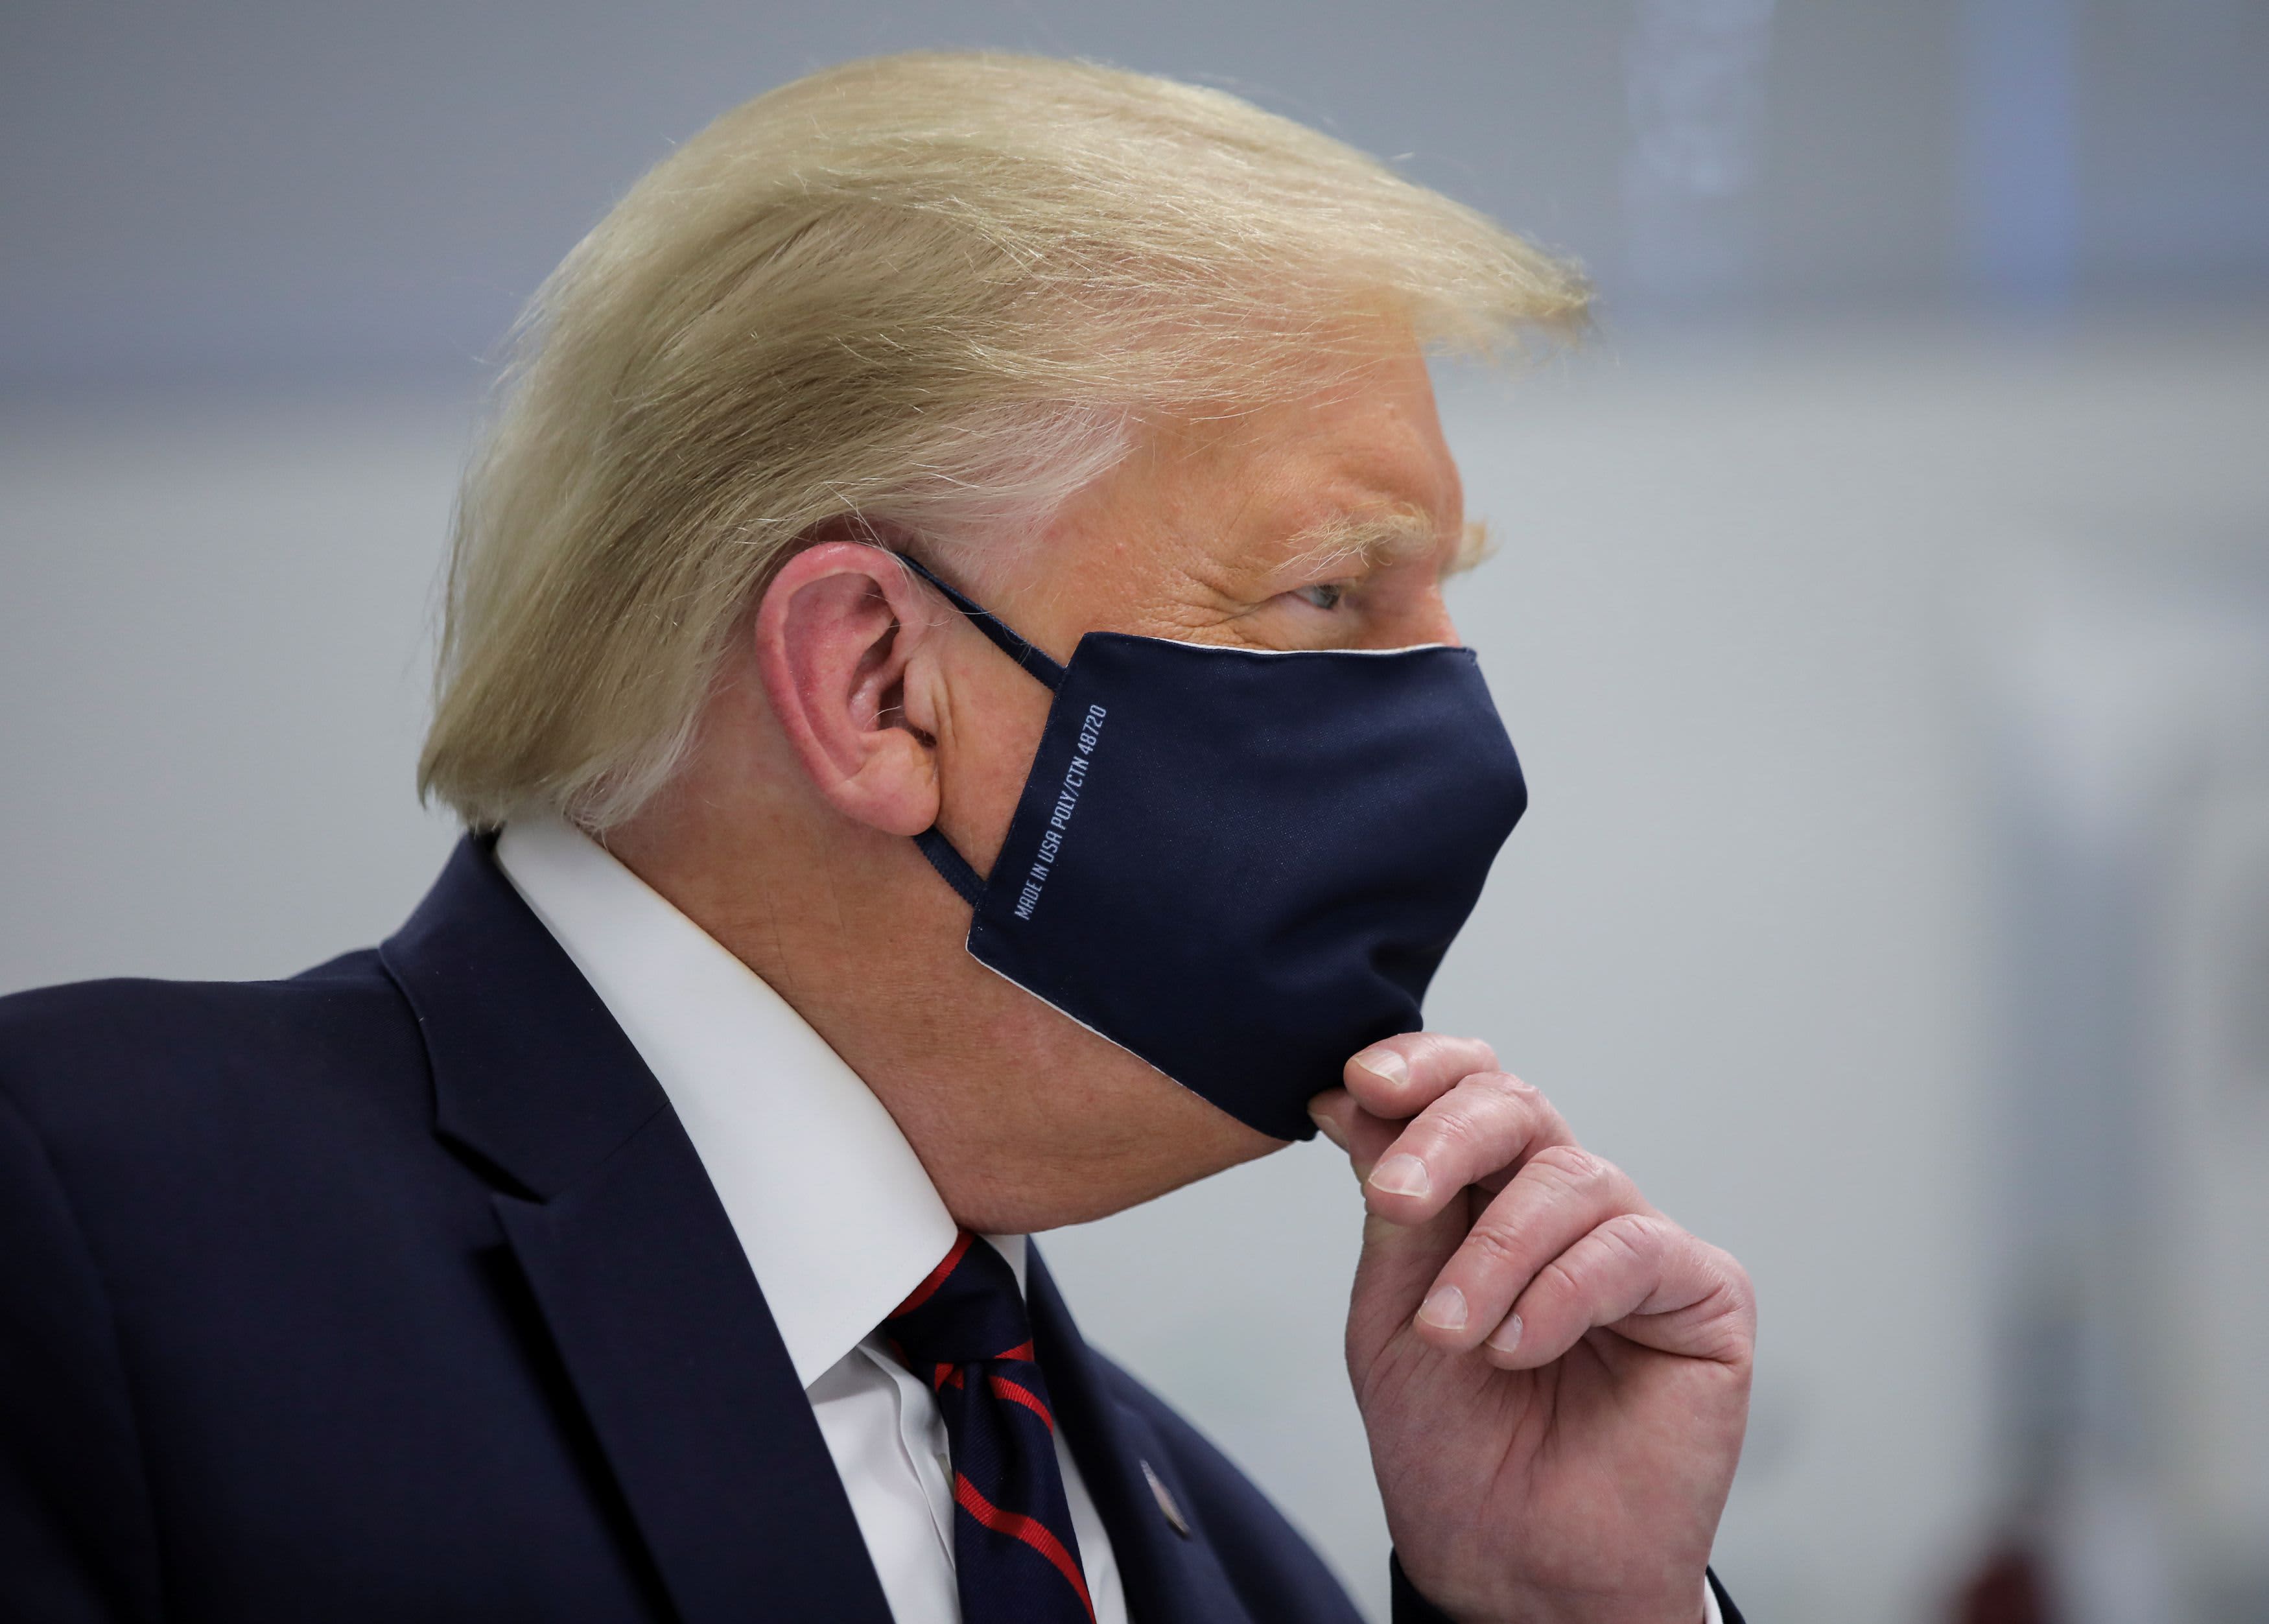 Techmeme Facebook Youtube And Twitter Work To Pull Versions Of A Video Touting Hydroxychloroquine As A Covid 19 Cure After It Was Shared By Trump And His Allies Sam Shead Cnbc - darren nguyen on twitter roblox